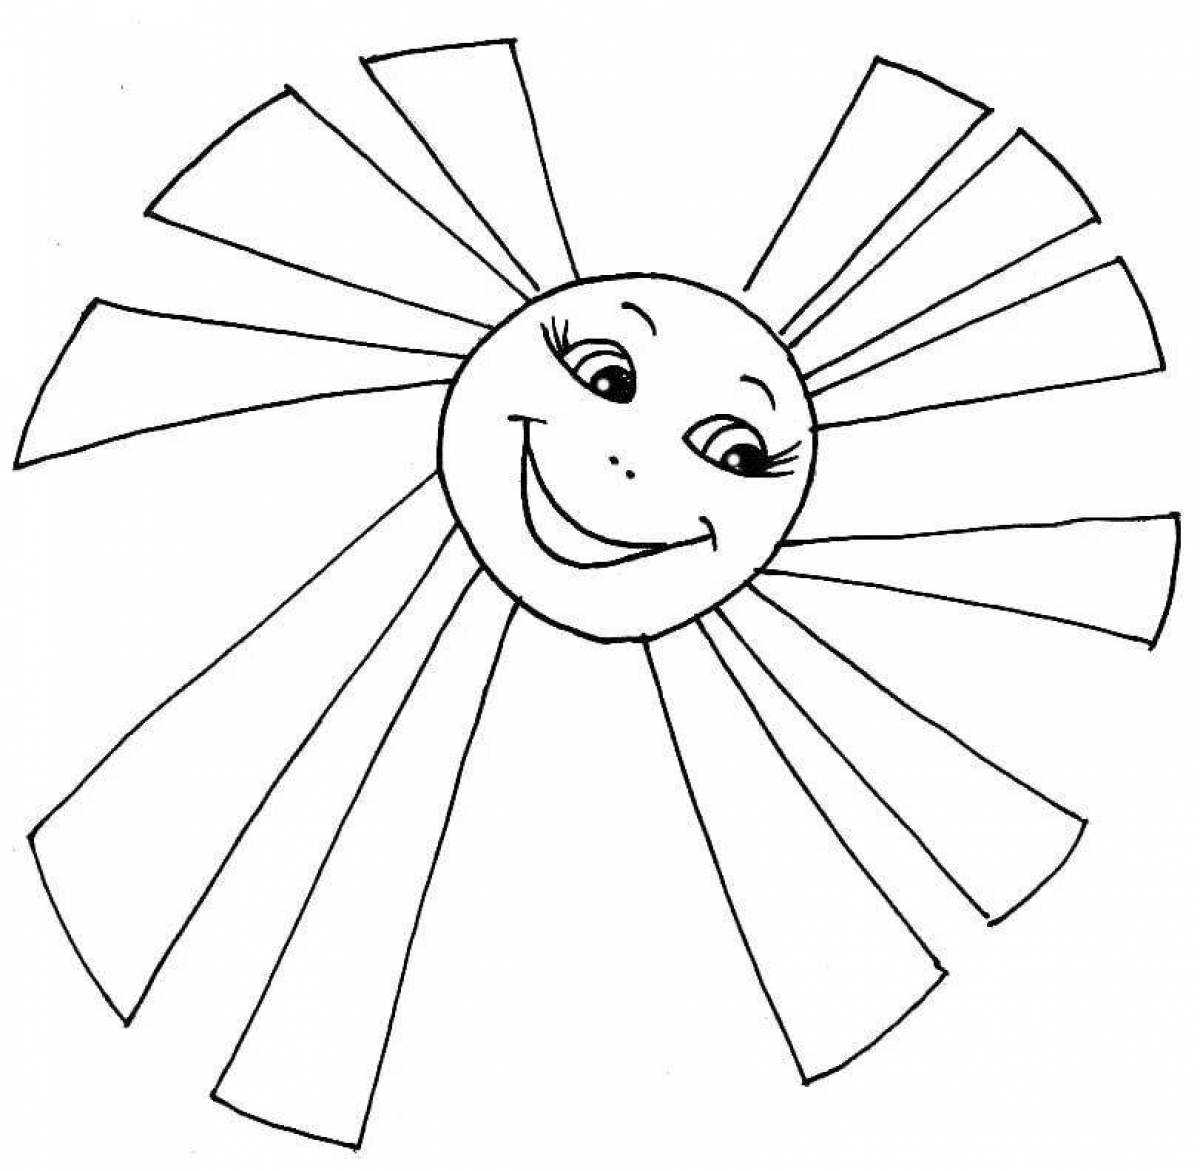 Playful sun coloring for kids